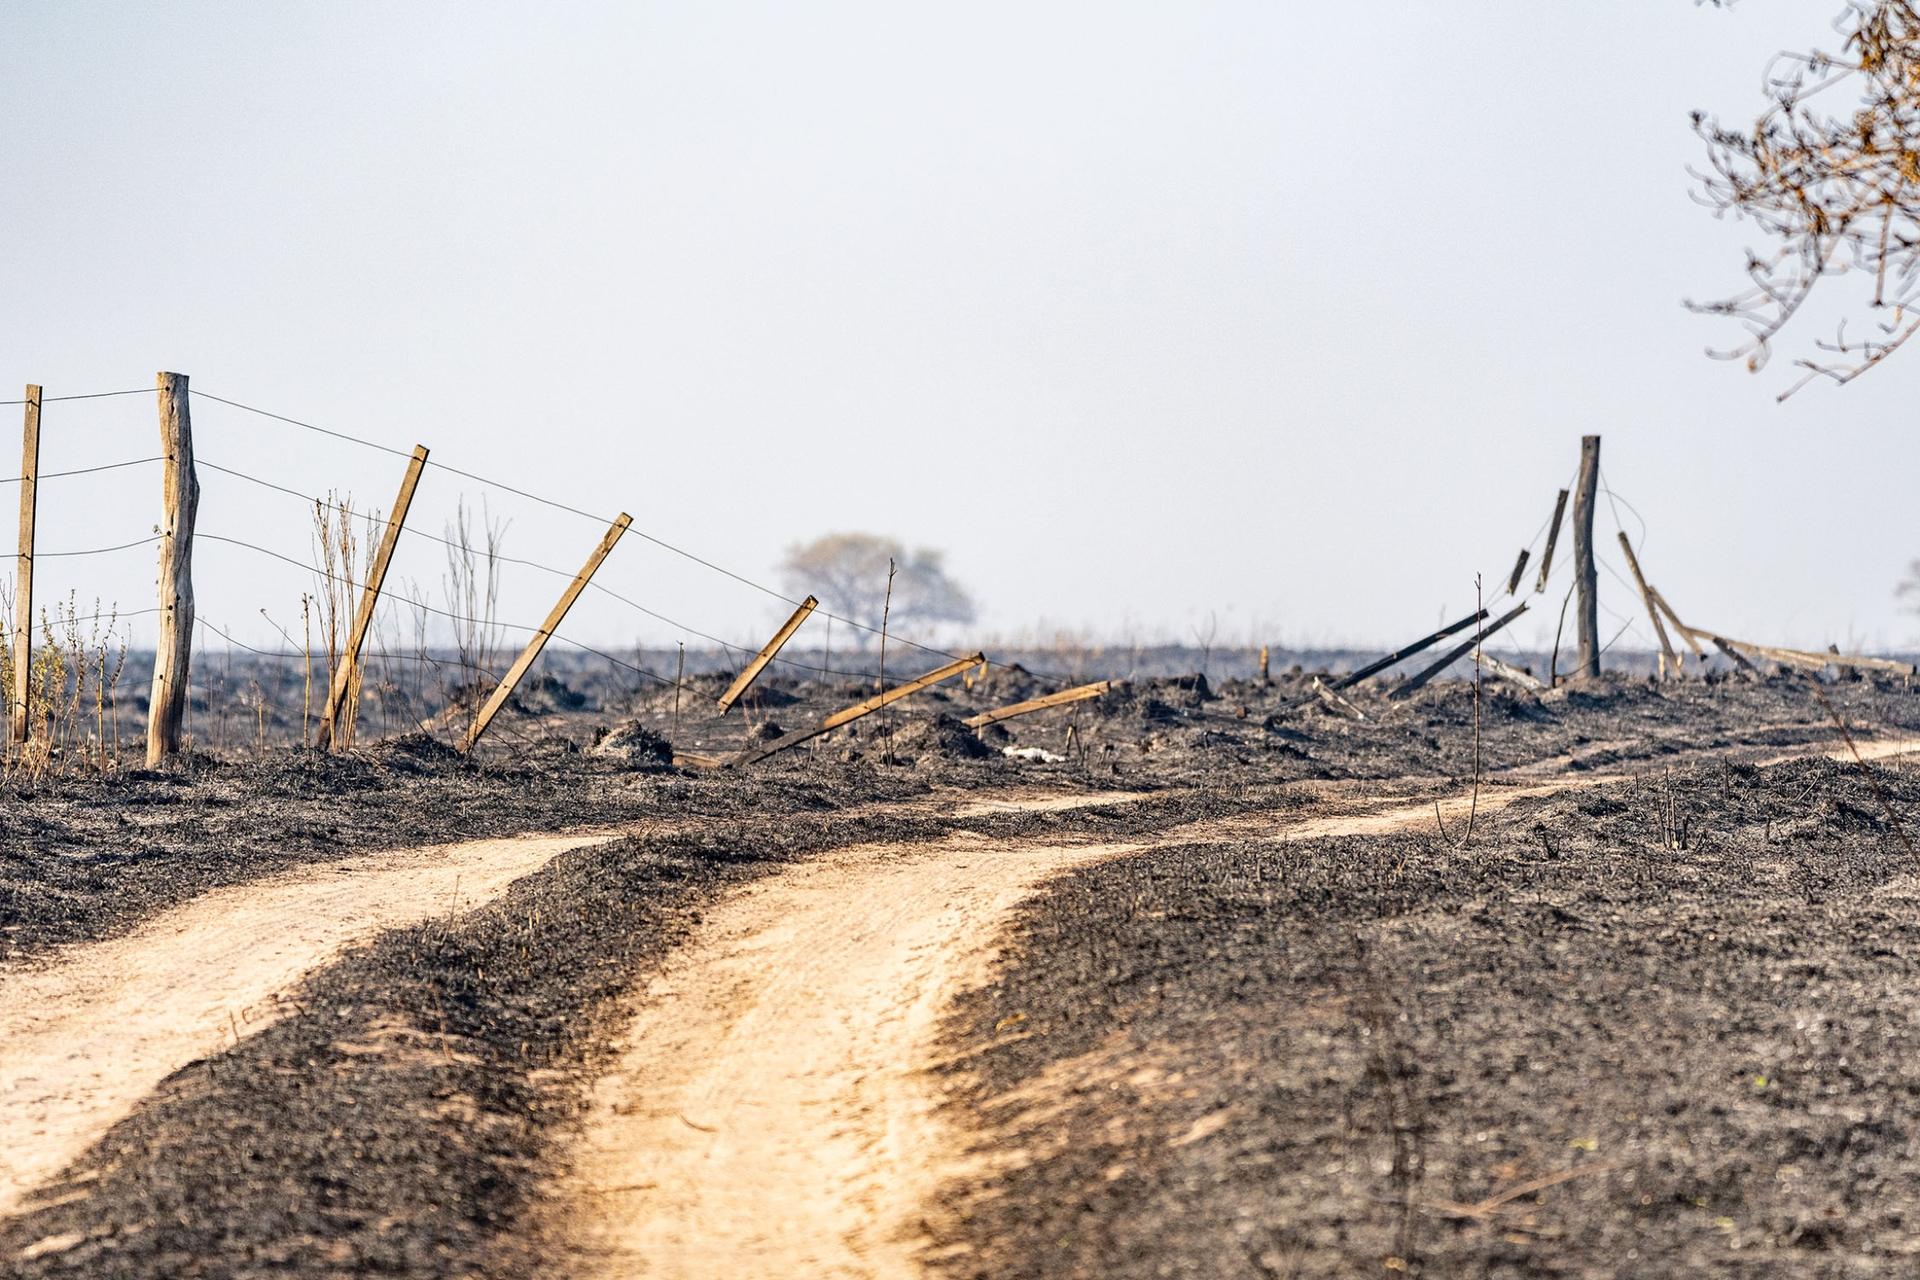 Fences burned down in parts of the Iberá wetlands in northern Argentina charred by wildfires